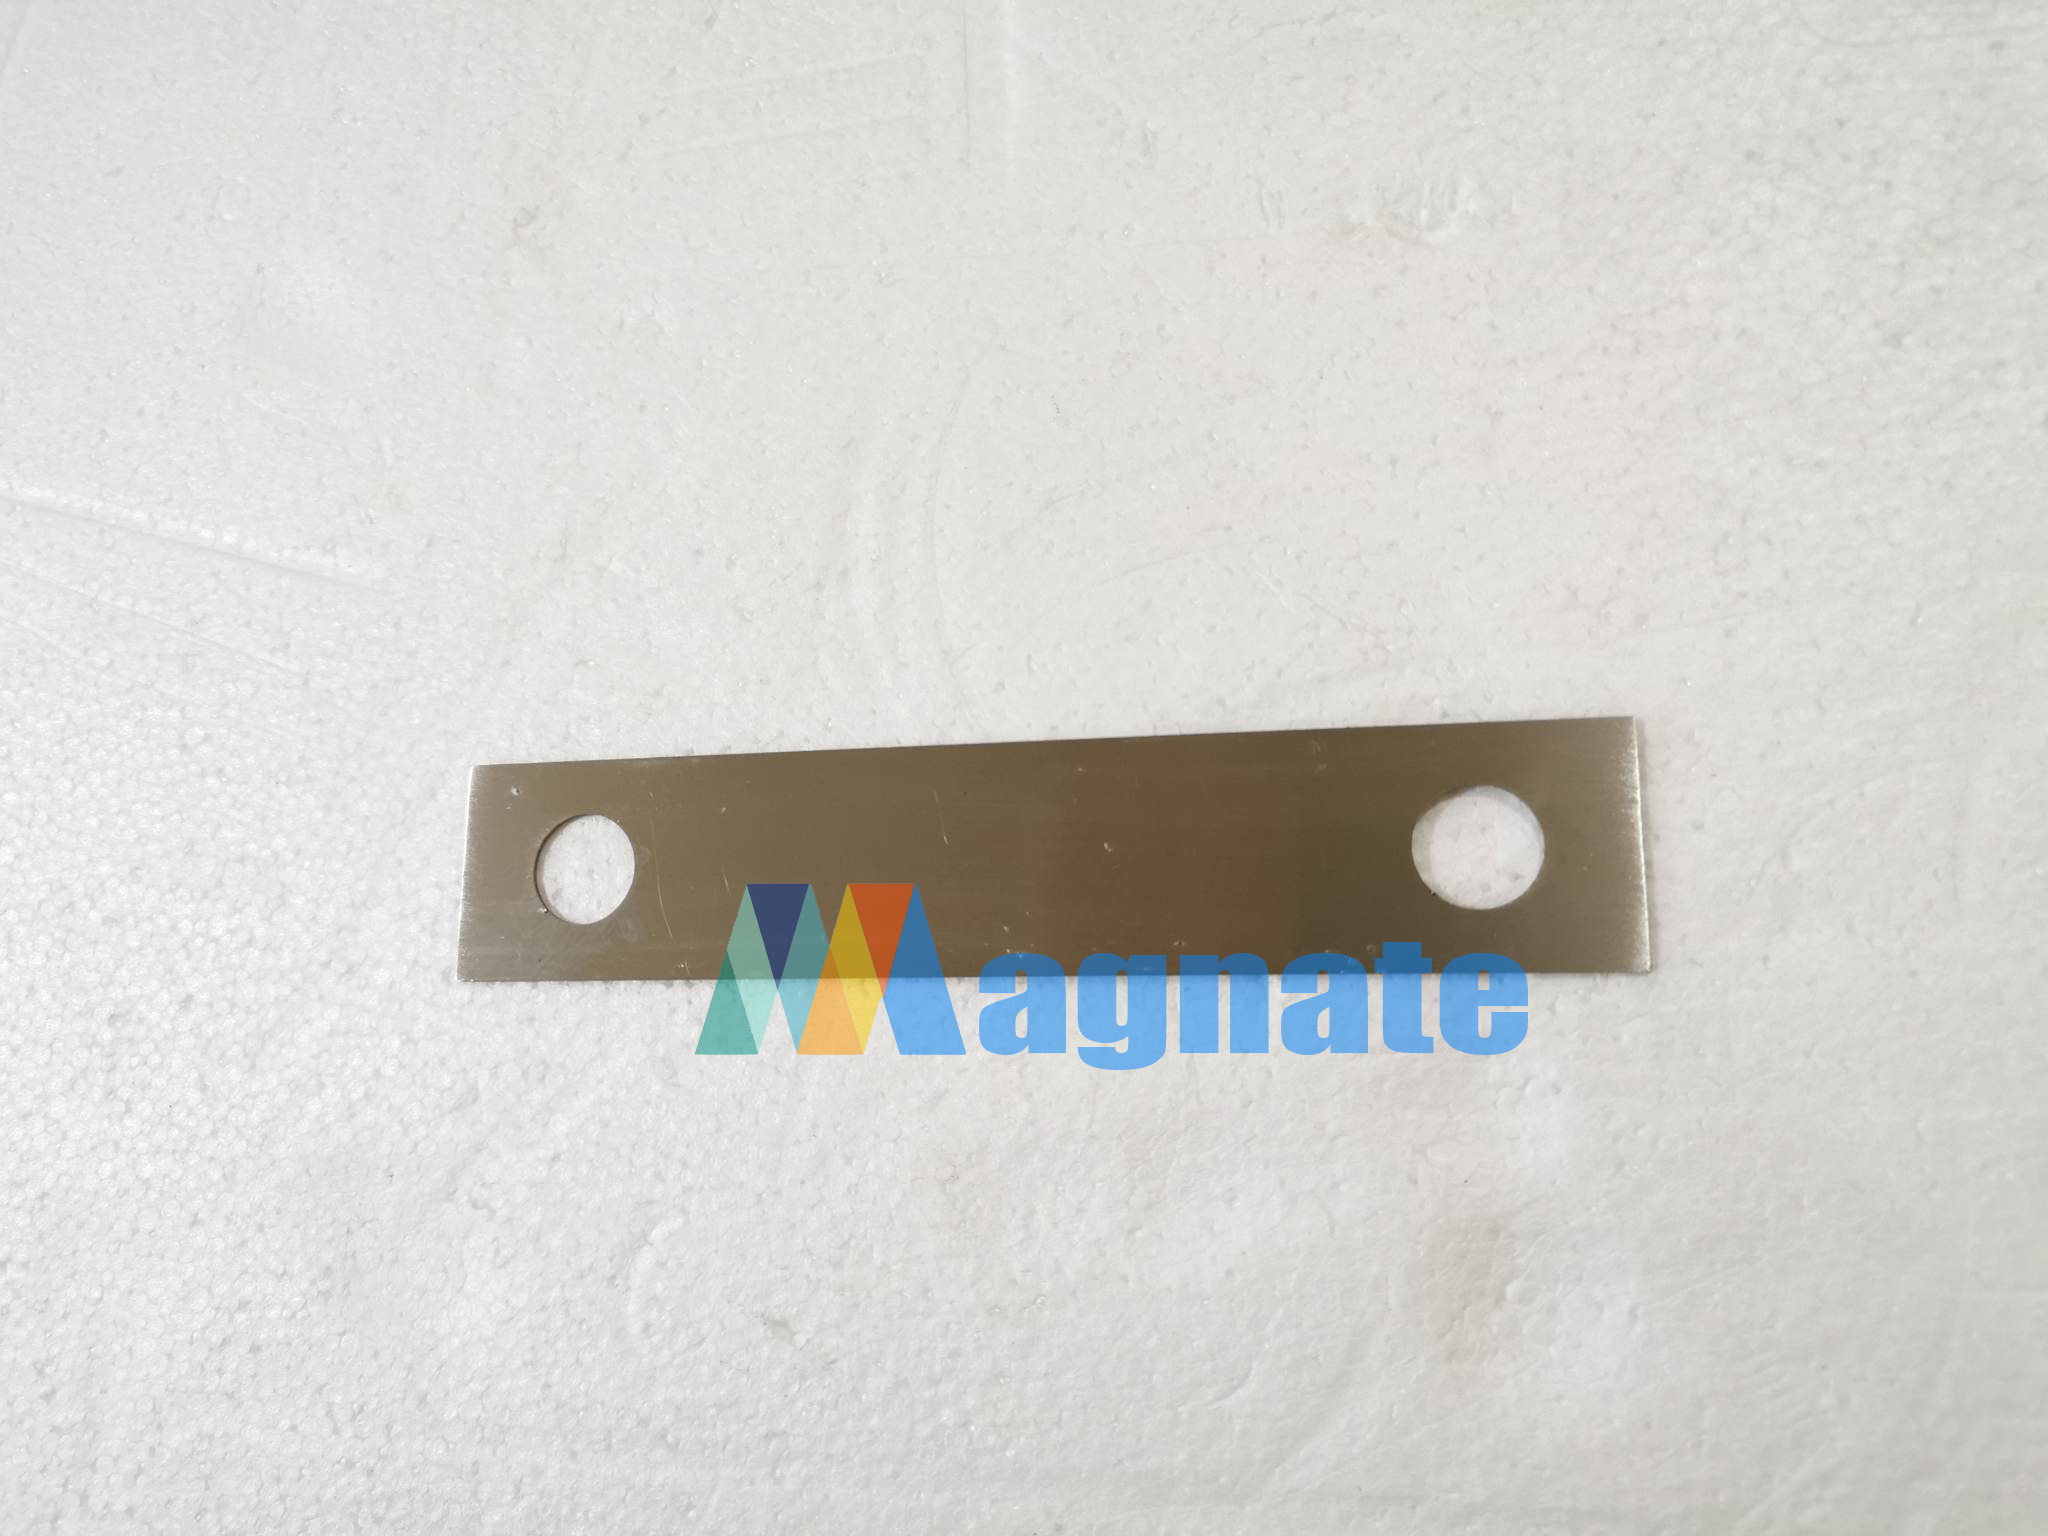 Two Hole Rectangular Plate Washer Material: SS316 Size: M16 x 178mm x 35mm x 1mm Length: 178mm Width: 35mm Thickness: 1mm Hole Diameter: 17mm Between Hole Center: 135 mm